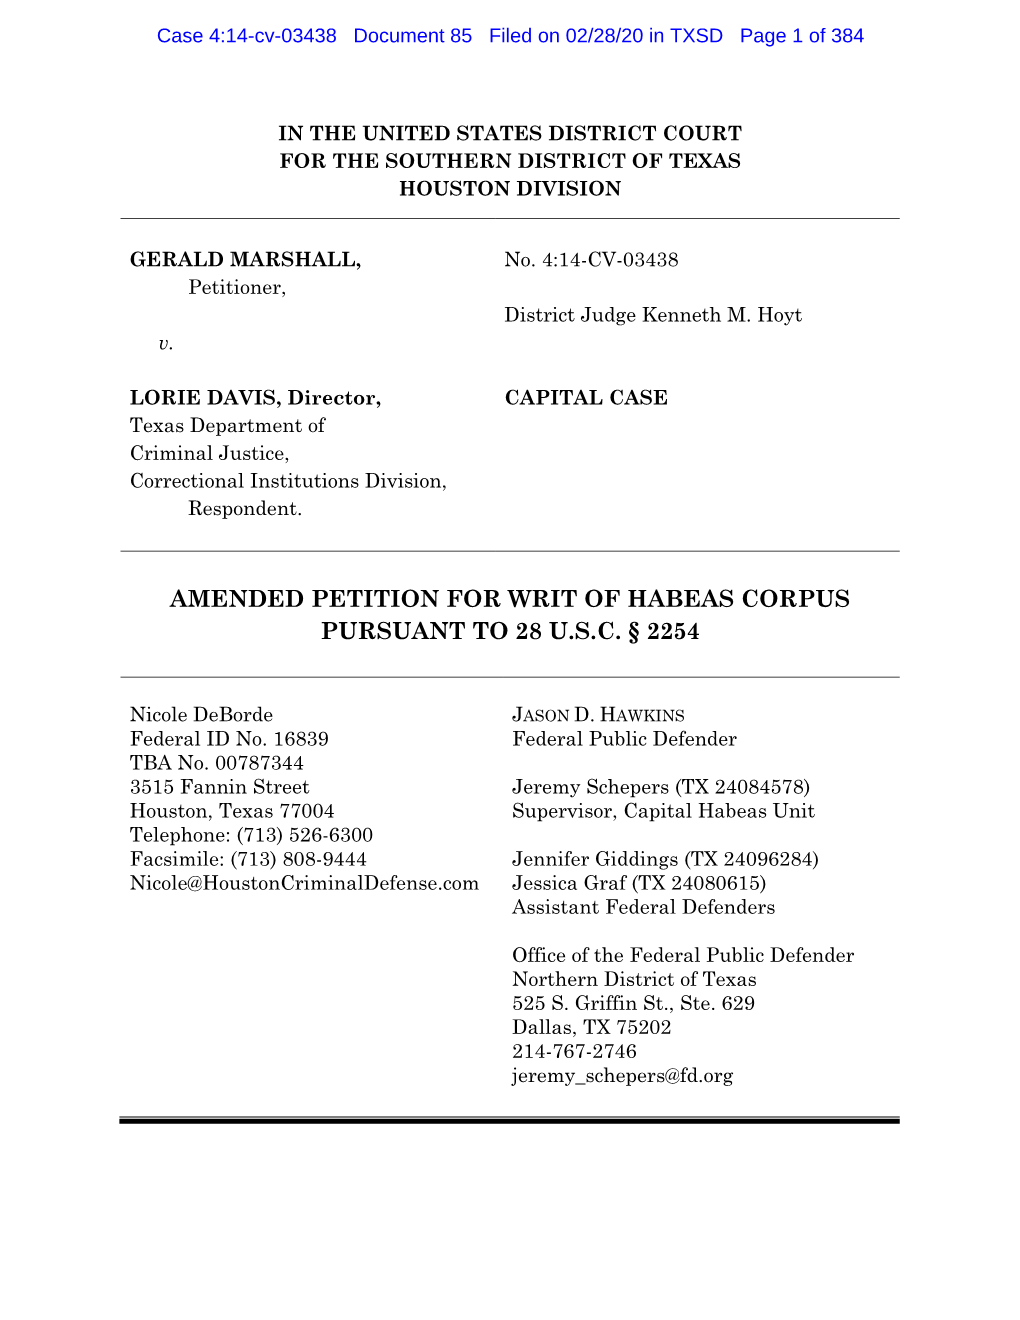 Amended Petition for Writ of Habeas Corpus Pursuant to 28 U.S.C